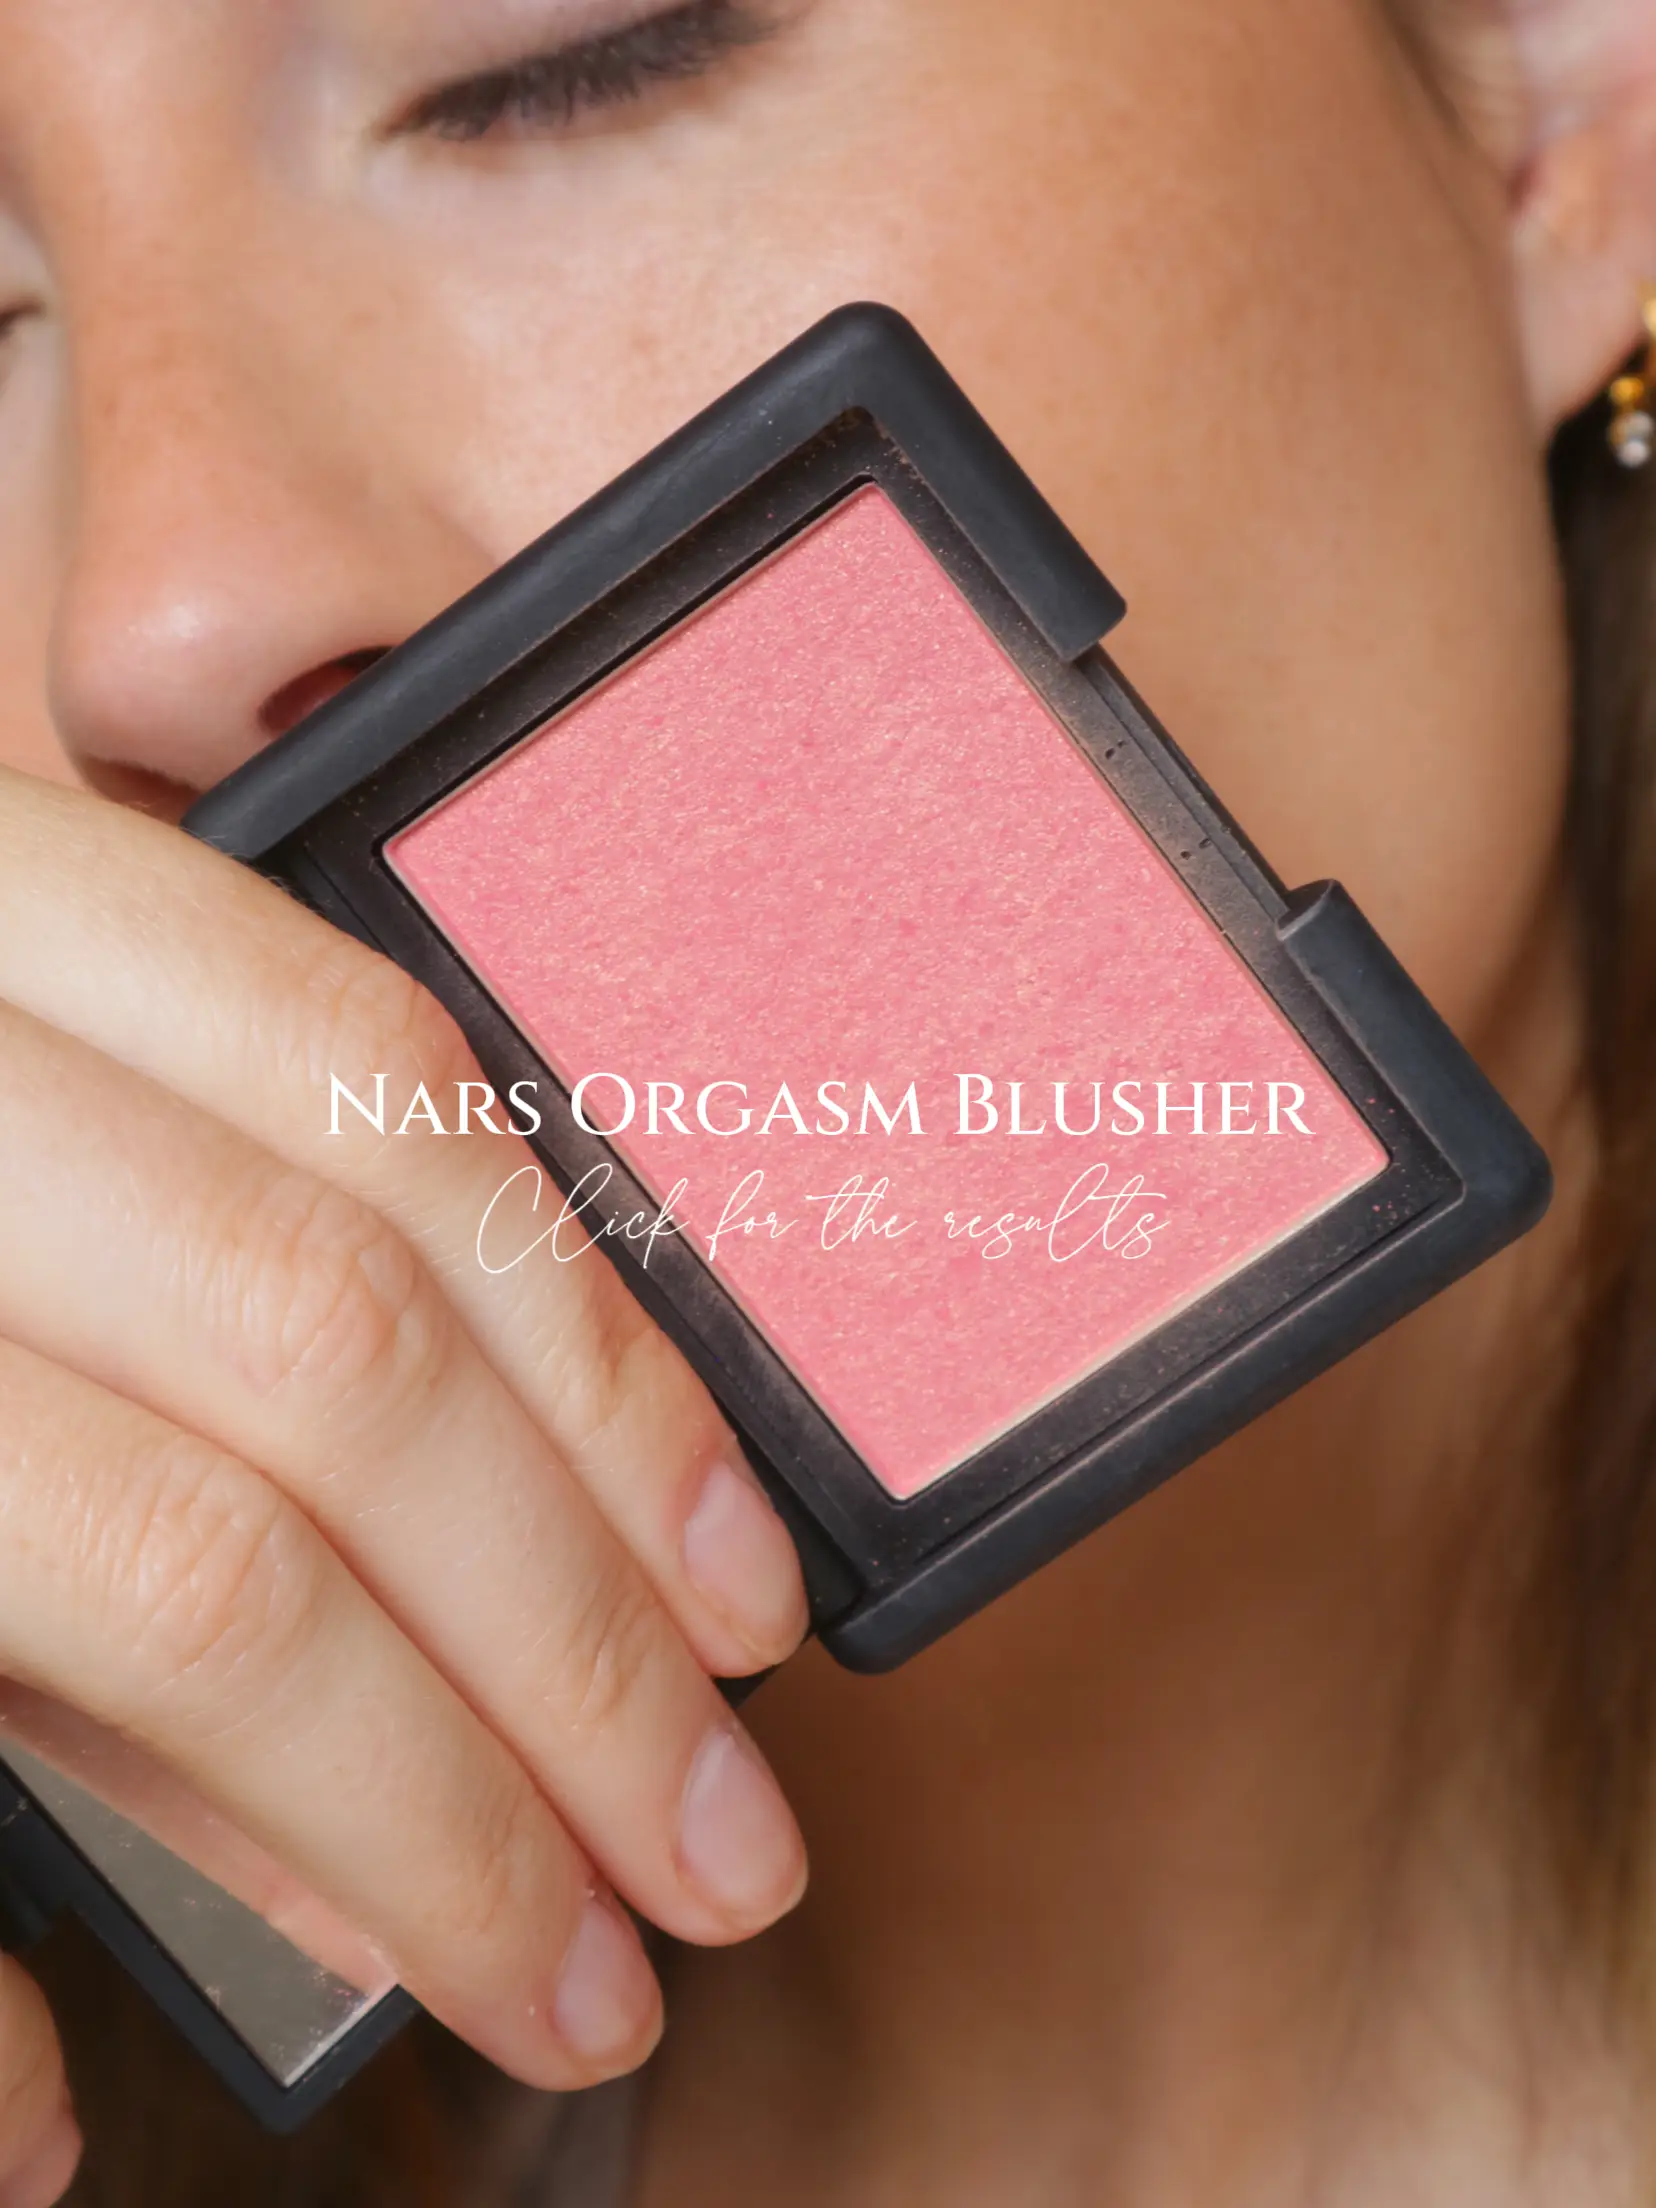 25 Best Dupes For Nars Orgasm at Affordable Drugstore Prices